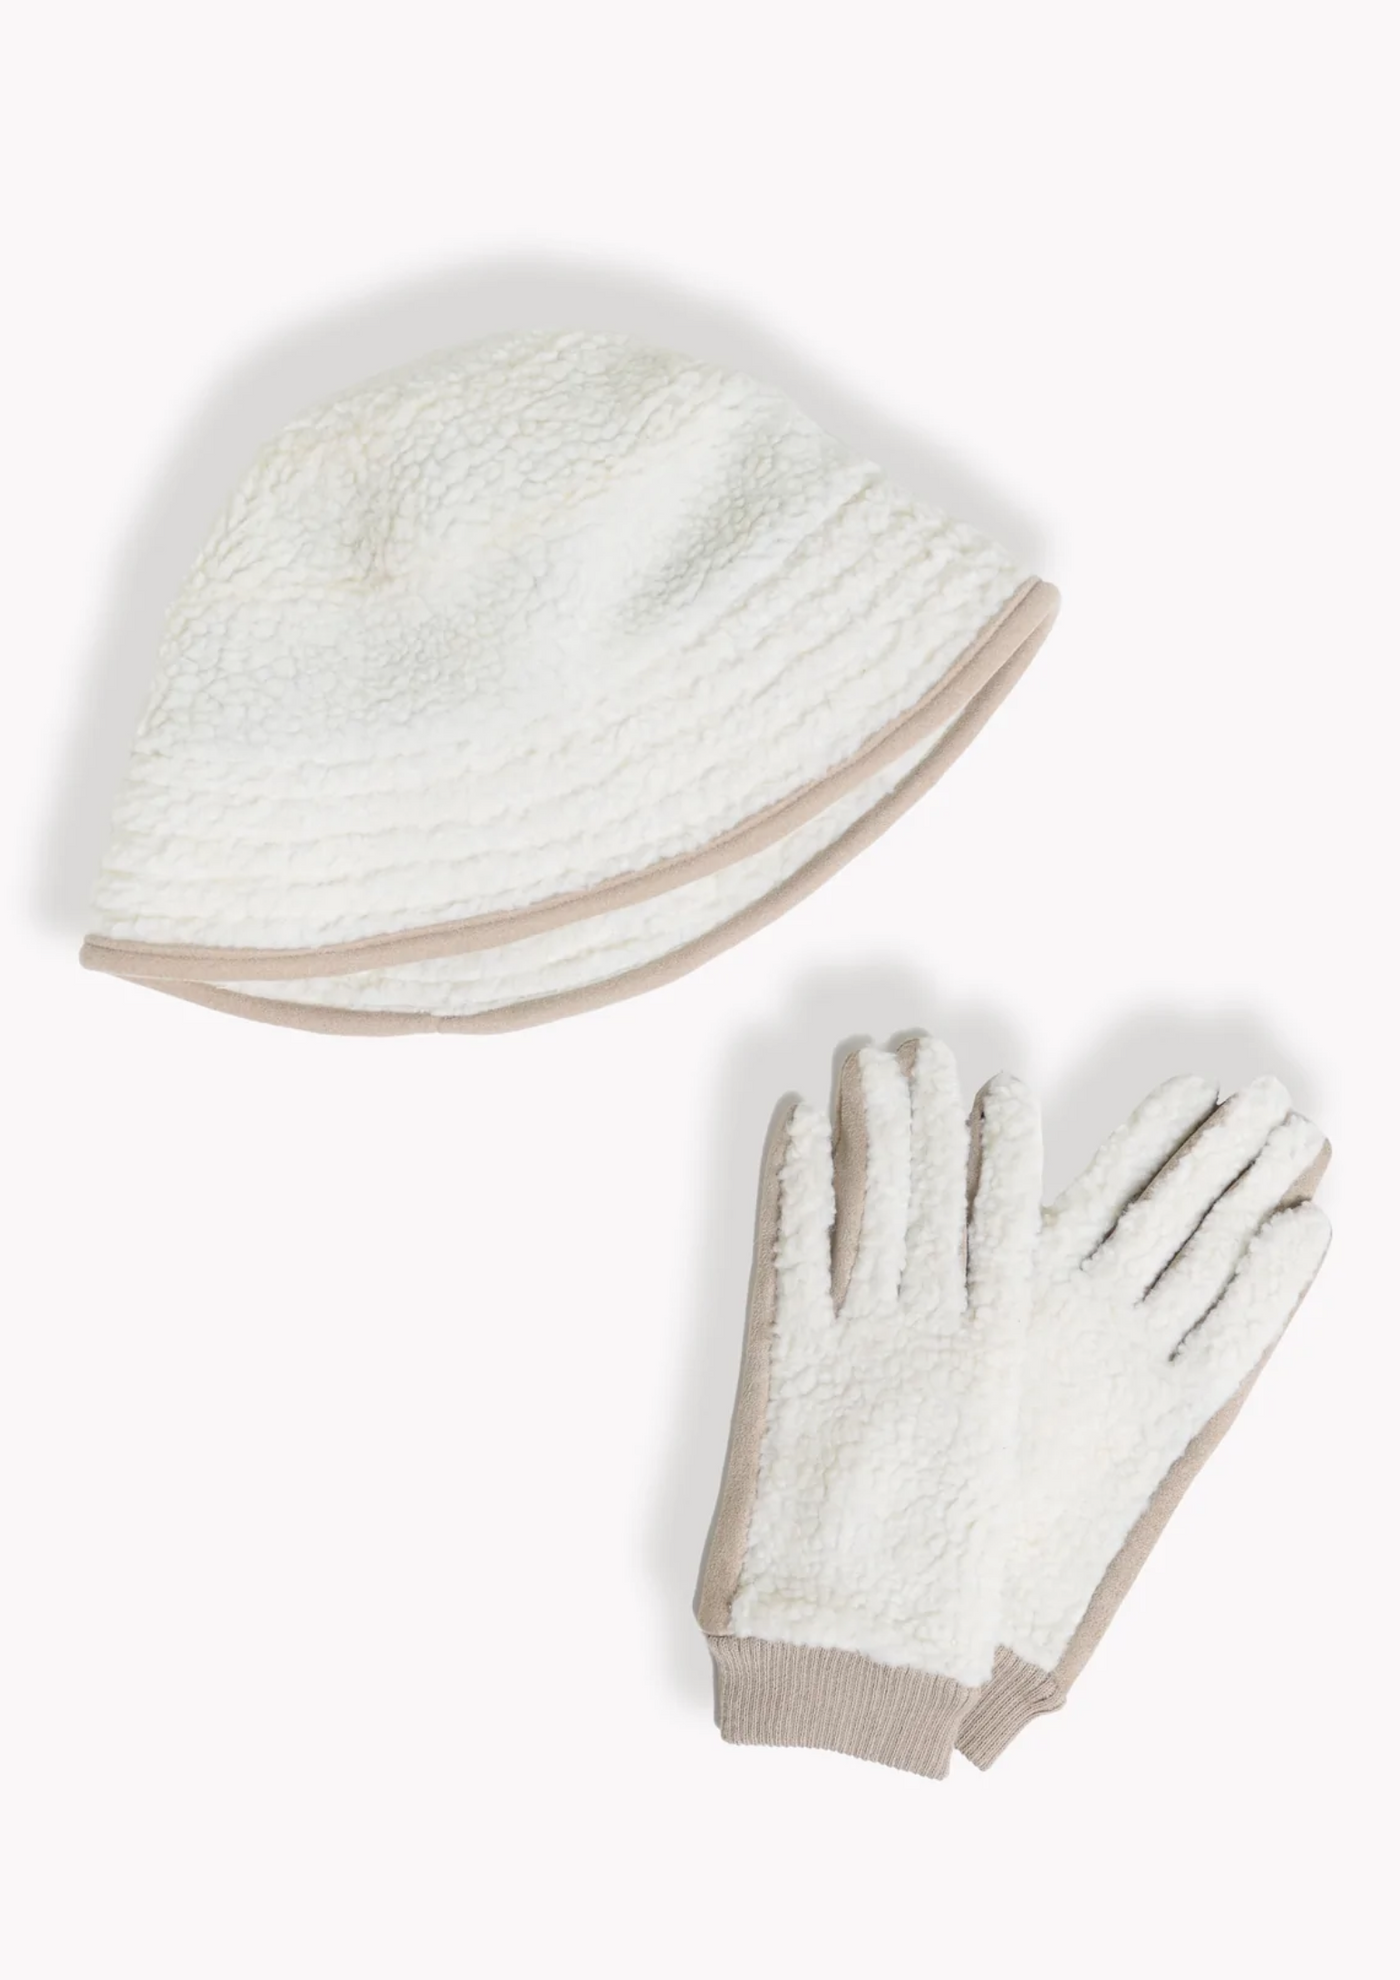 Cozy Shearling Gloves, Ivory